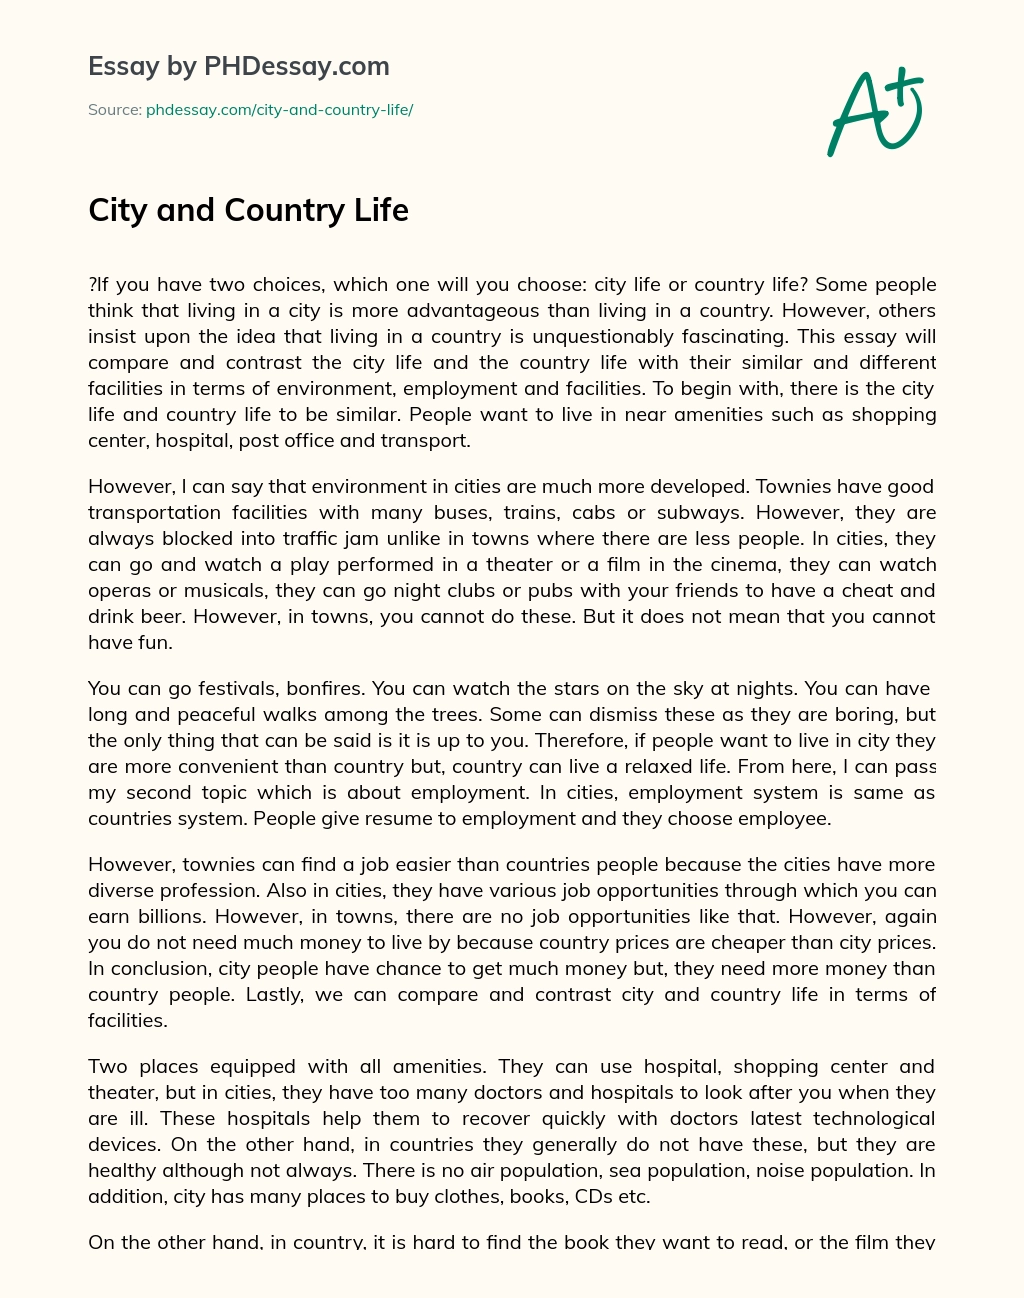 City and Country Life essay